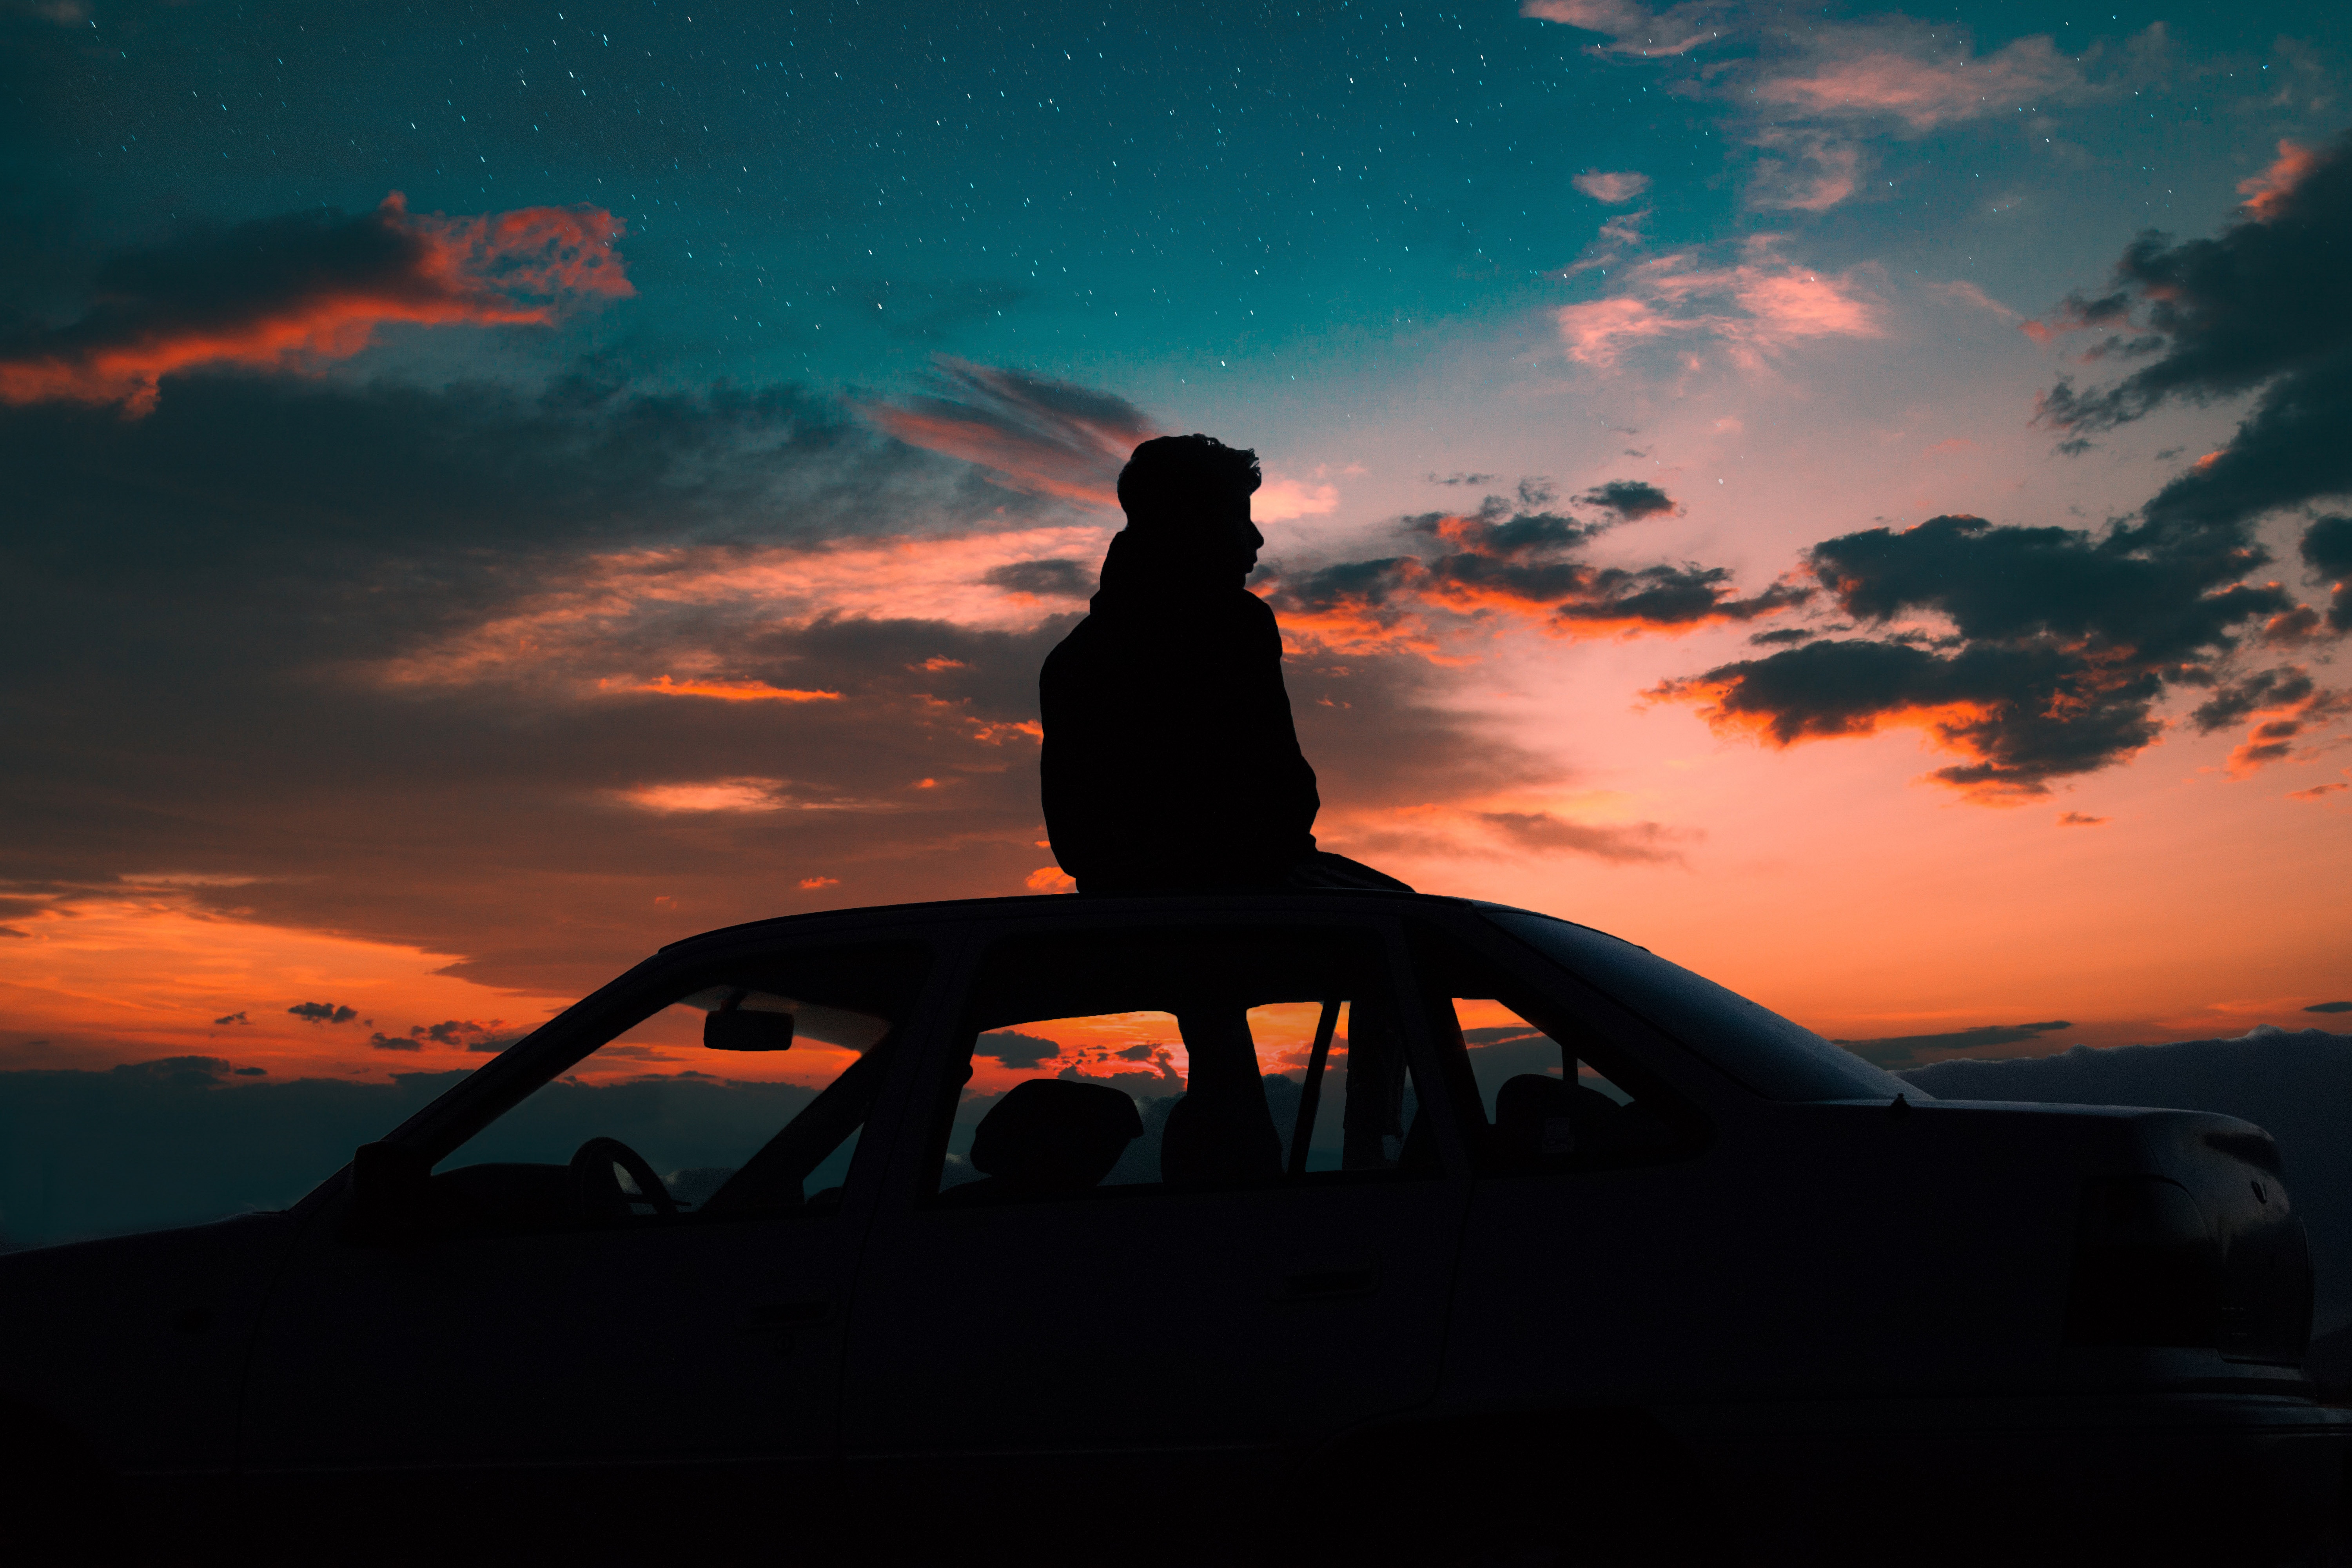 loneliness, dark, privacy, seclusion, car, starry sky, human, person